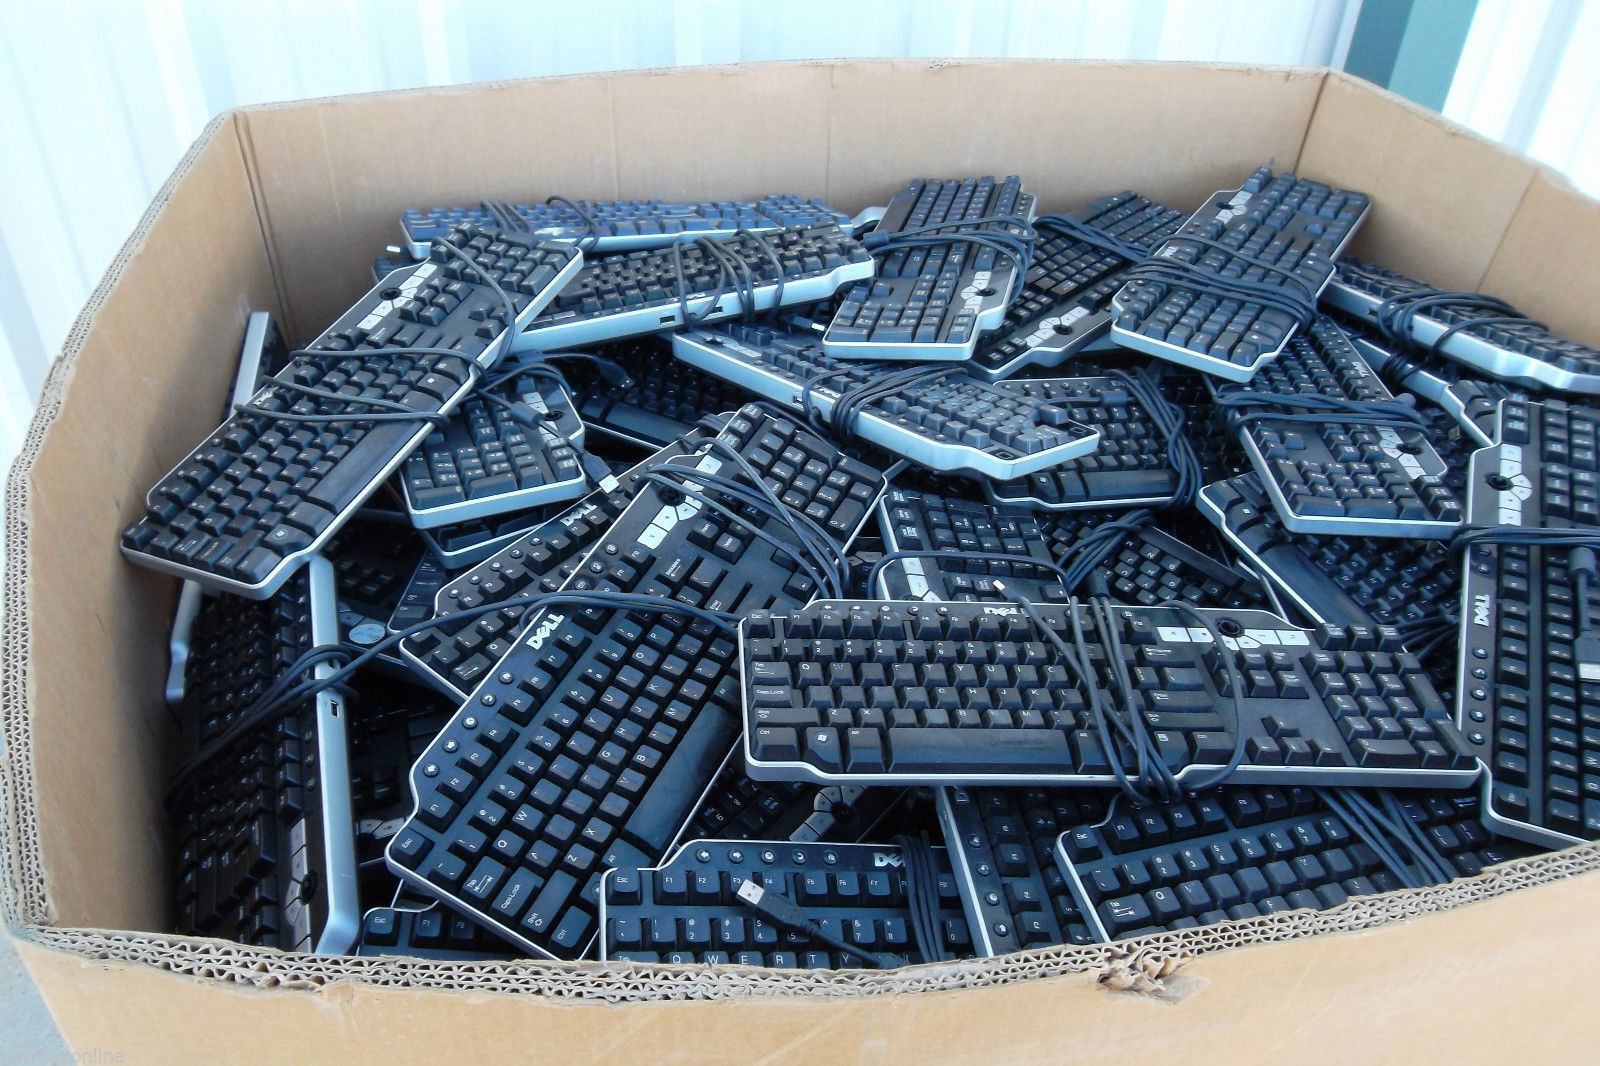 LOT of 25 Mixed Keyboards for Upcycle Projects or Artistic Displays USB PS/2